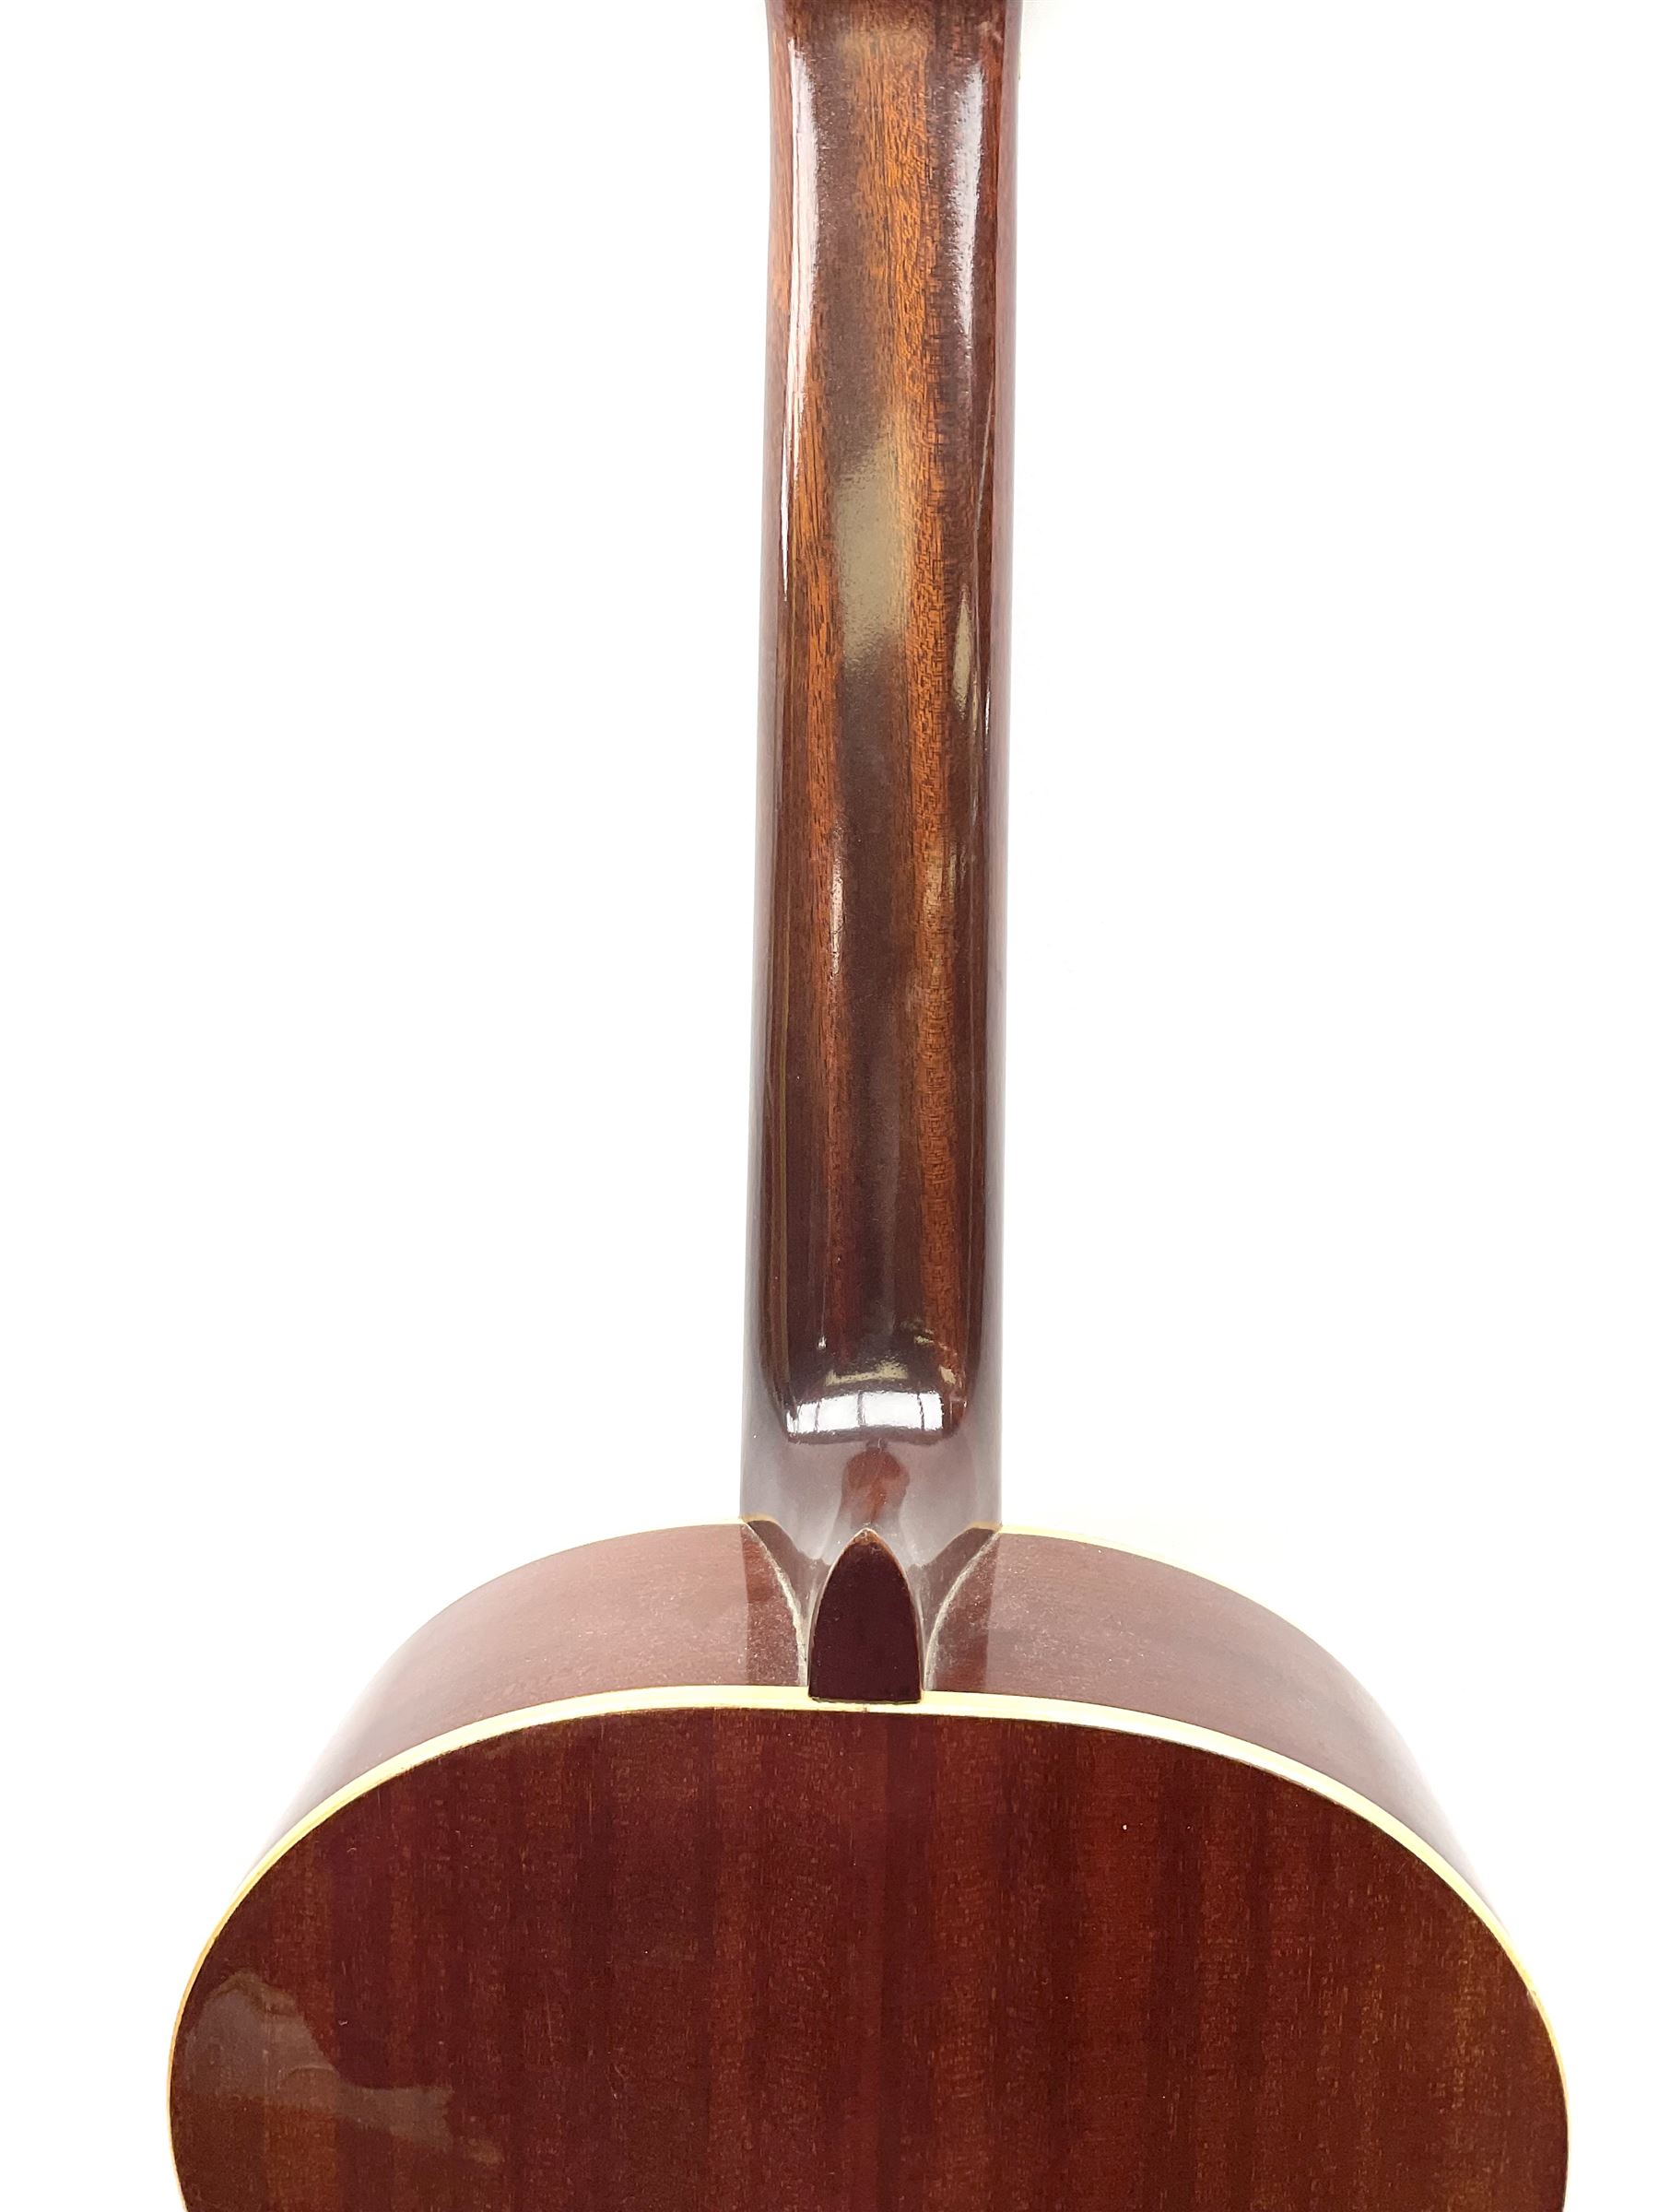 Spanish Concert Grande acoustic guitar with mahogany back and ribs and spruce top L100cm; in soft ca - Image 7 of 17